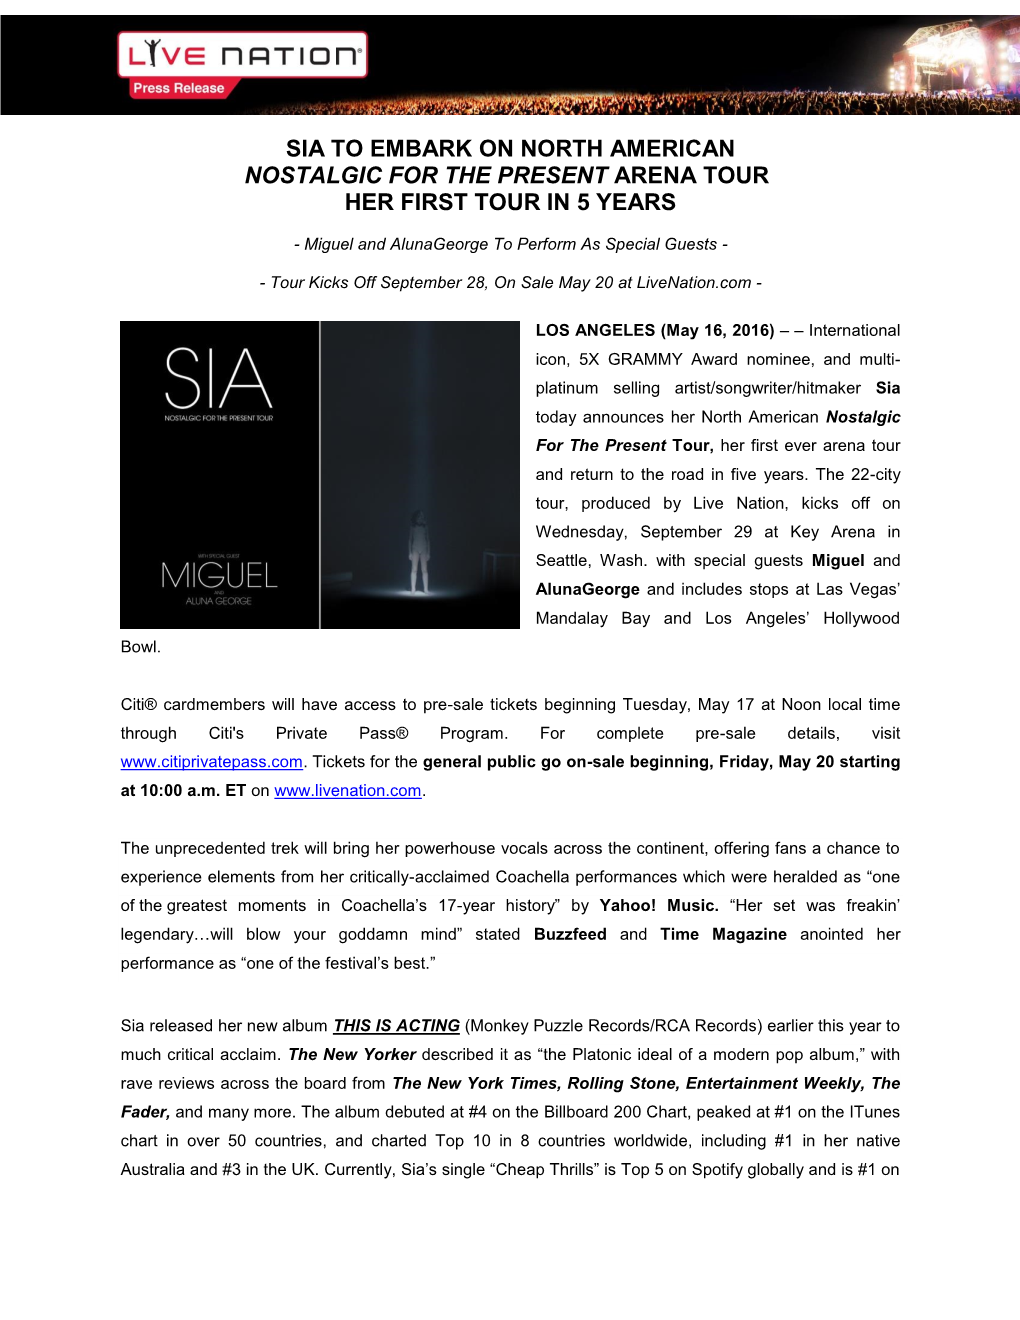 Sia to Embark on North American Nostalgic for the Present Arena Tour Her First Tour in 5 Years